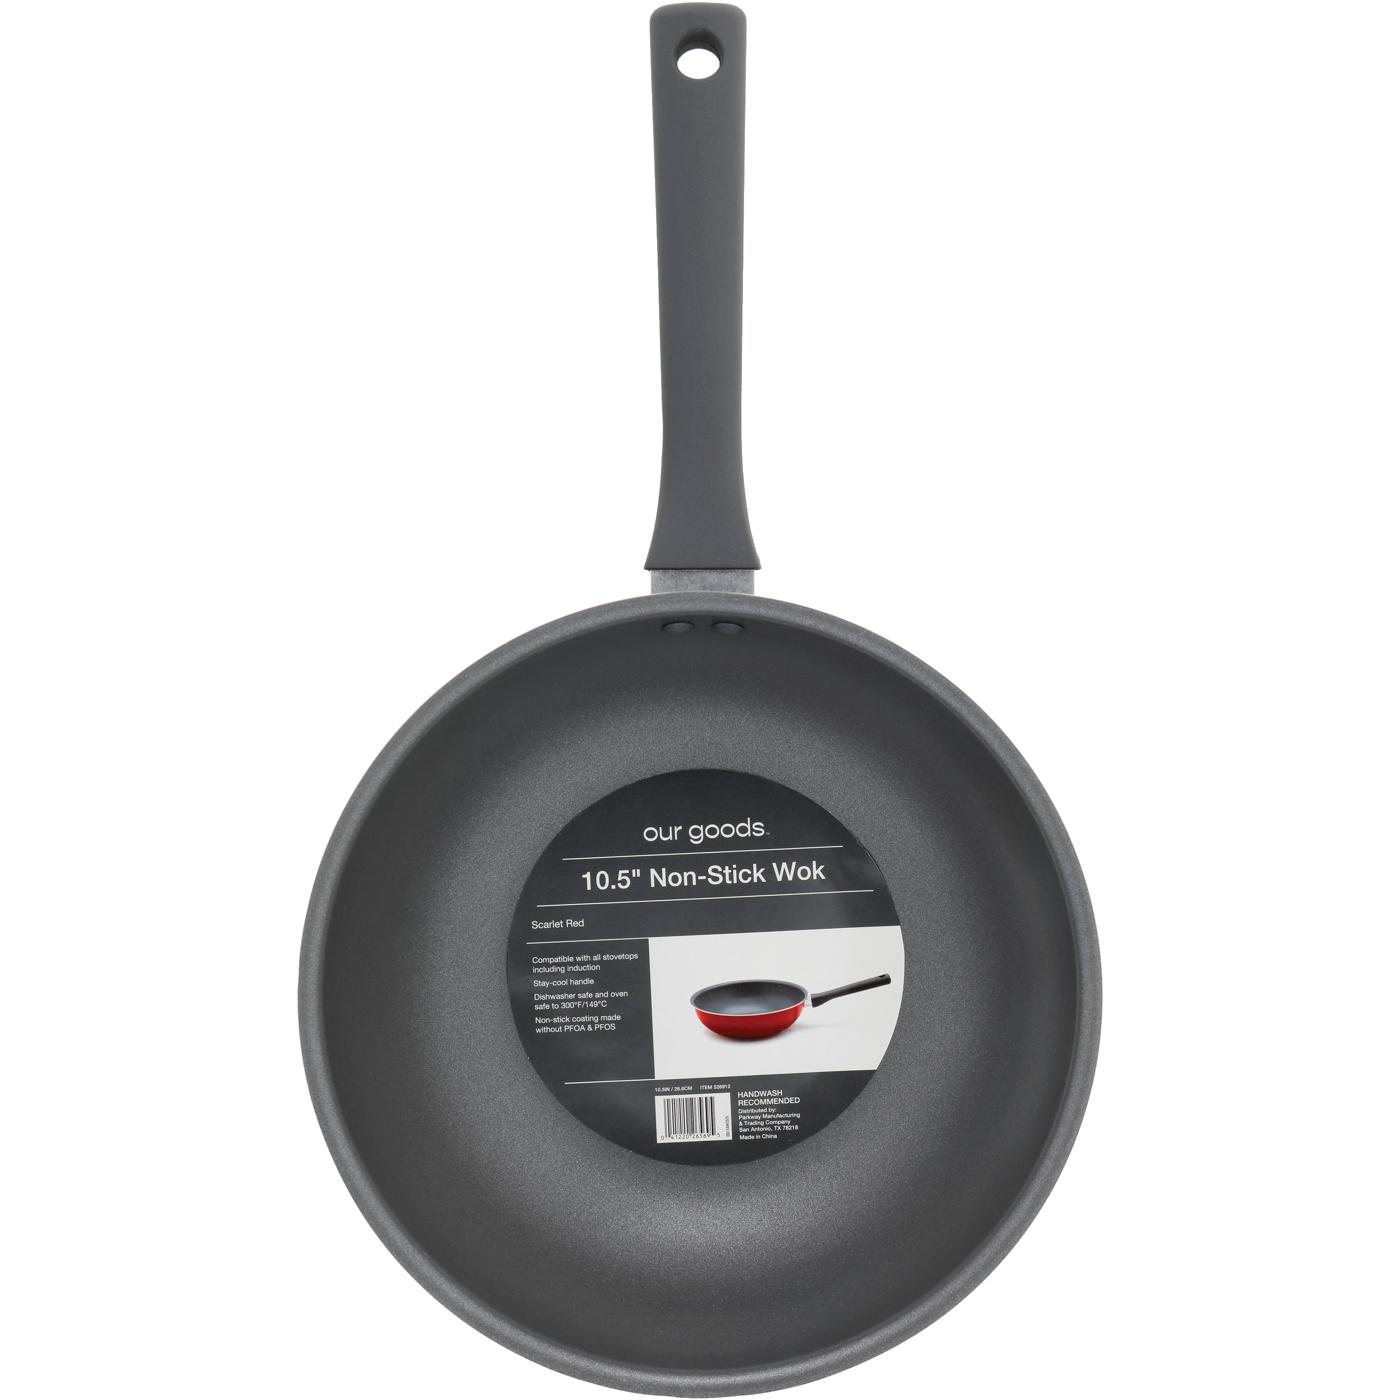 our goods Non-Stick Wok - Scarlet Red; image 2 of 2